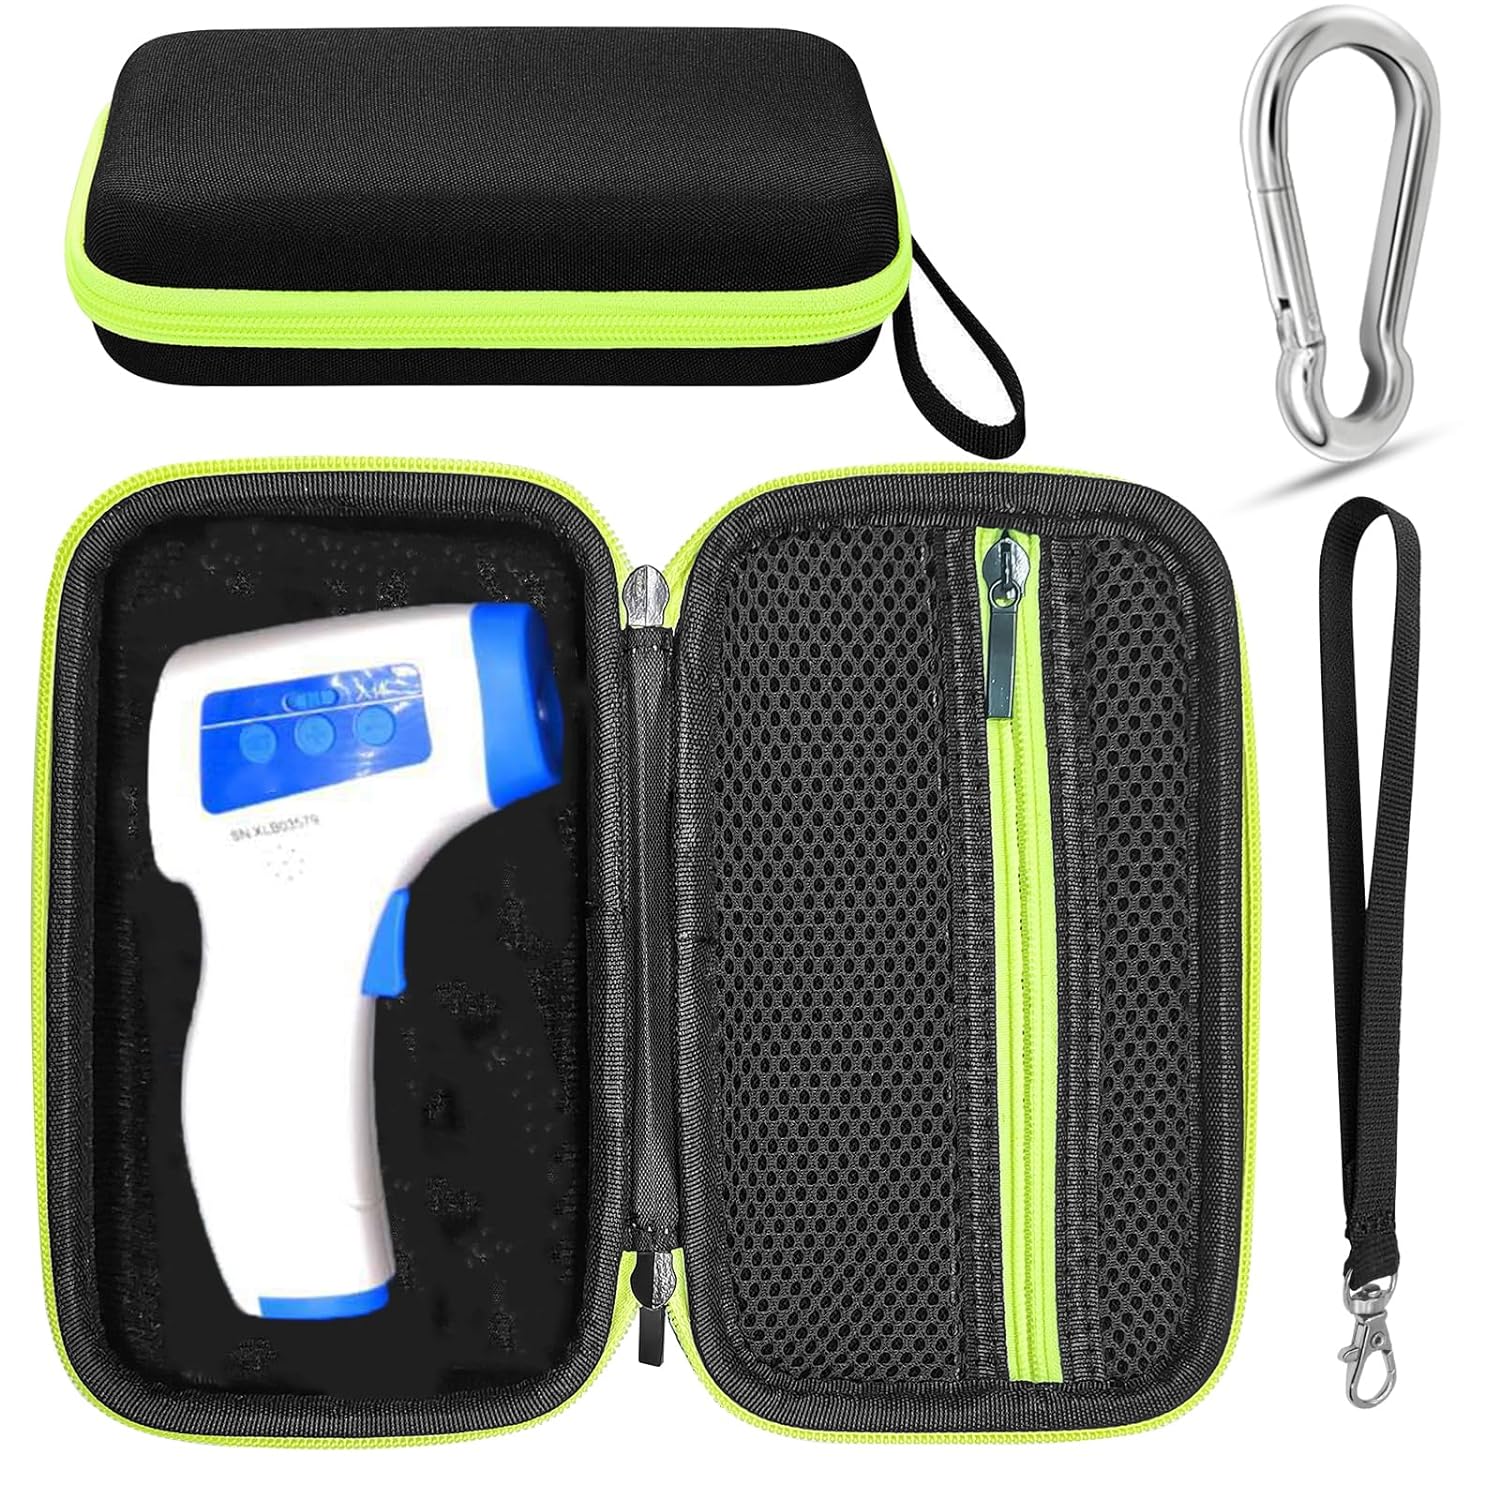 ZLiT Case for Forehead Thermometer,EVA Shockproof Waterproof Storage Bag Carrying Case for Digital Forehead Thermometer(Green)